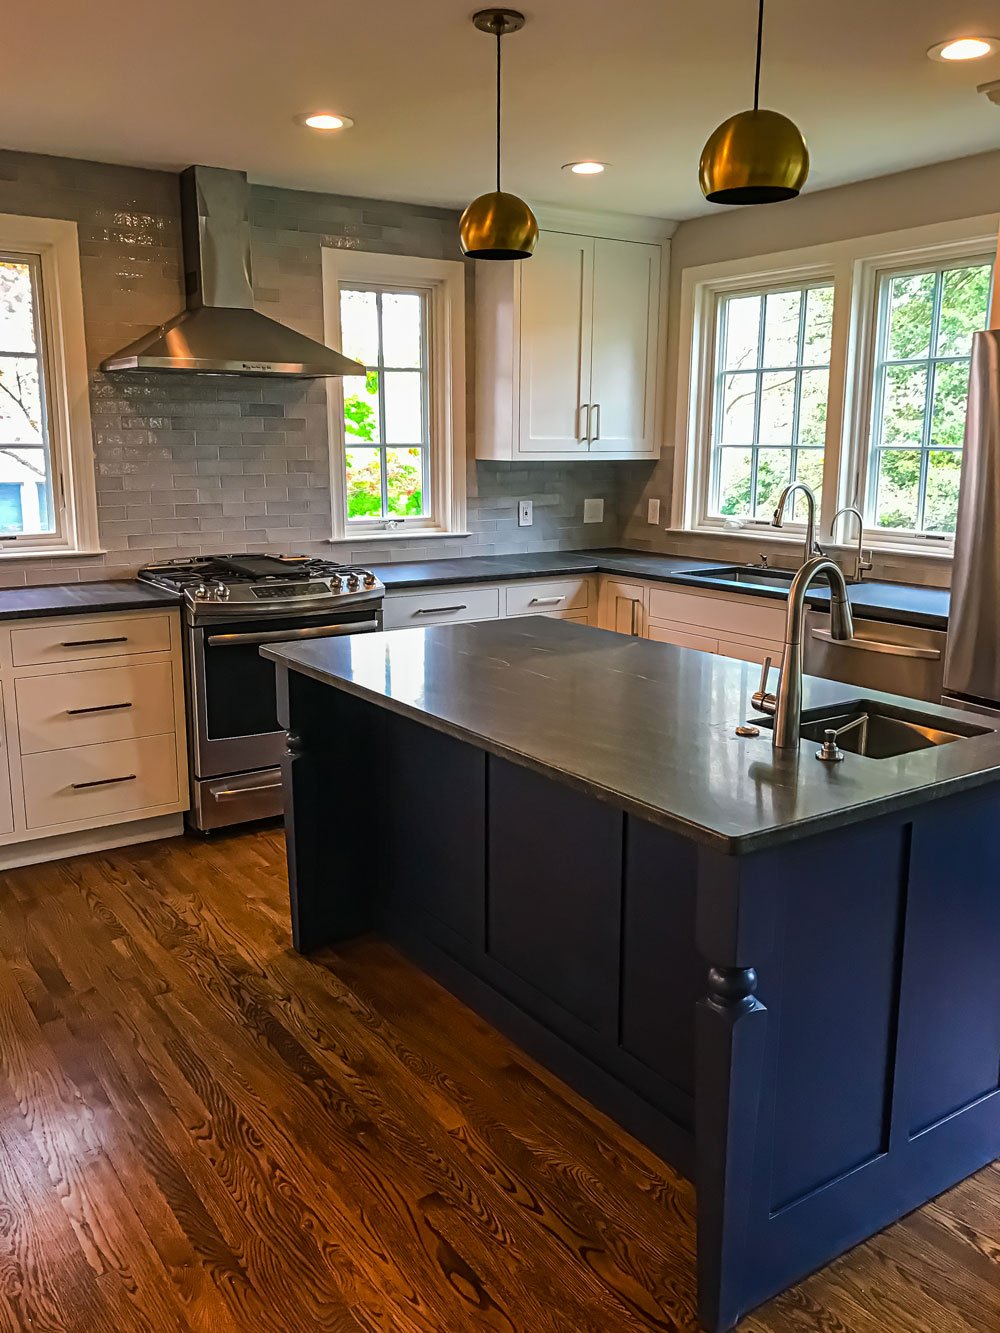 Kitchen renovation featuring stainless steel fixtures, blue wooden island, and many windows for natural light to open the floorplan